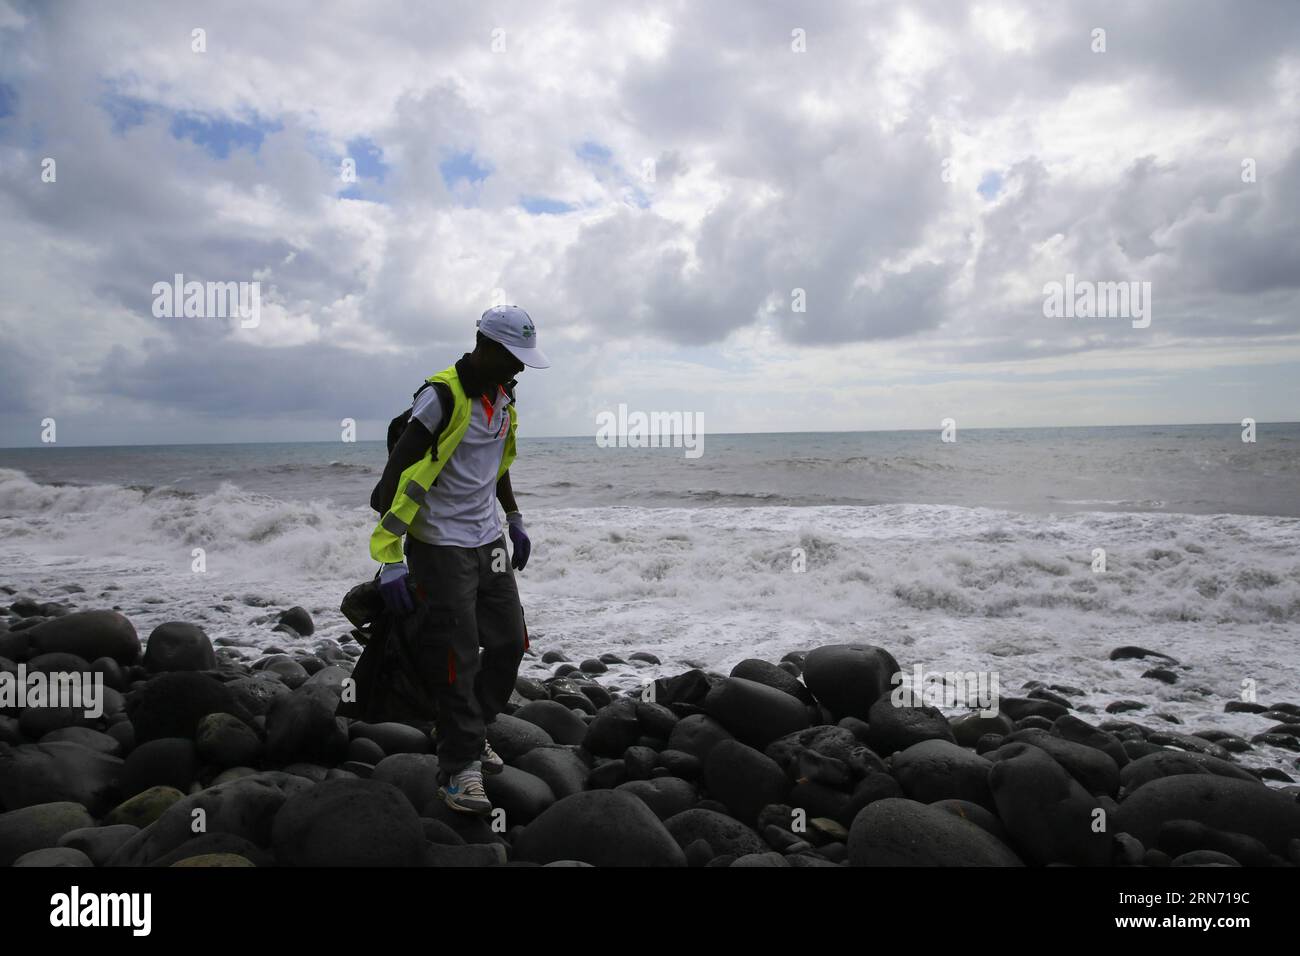 LA REUNION, Aug. 12, 2015 -- A searcher searches the Saint Andre beach, France s oversea island La Reunion, on Aug. 12, 2015. La Reunion authority Monday said that no clues related to the missing flight MH370 has been found here since the launch of a tridimensional search last Friday. ) LA REUNION-MH370 DEBRIS-SEARCH-CONTINUE PanxSiwei PUBLICATIONxNOTxINxCHN   La Reunion Aug 12 2015 a Searcher searches The Saint André Beach France S Oversea Iceland La Reunion ON Aug 12 2015 La Reunion Authority Monday Said Thatcher No clues RELATED to The Missing Flight MH370 has been Found Here Since The Laun Stock Photo